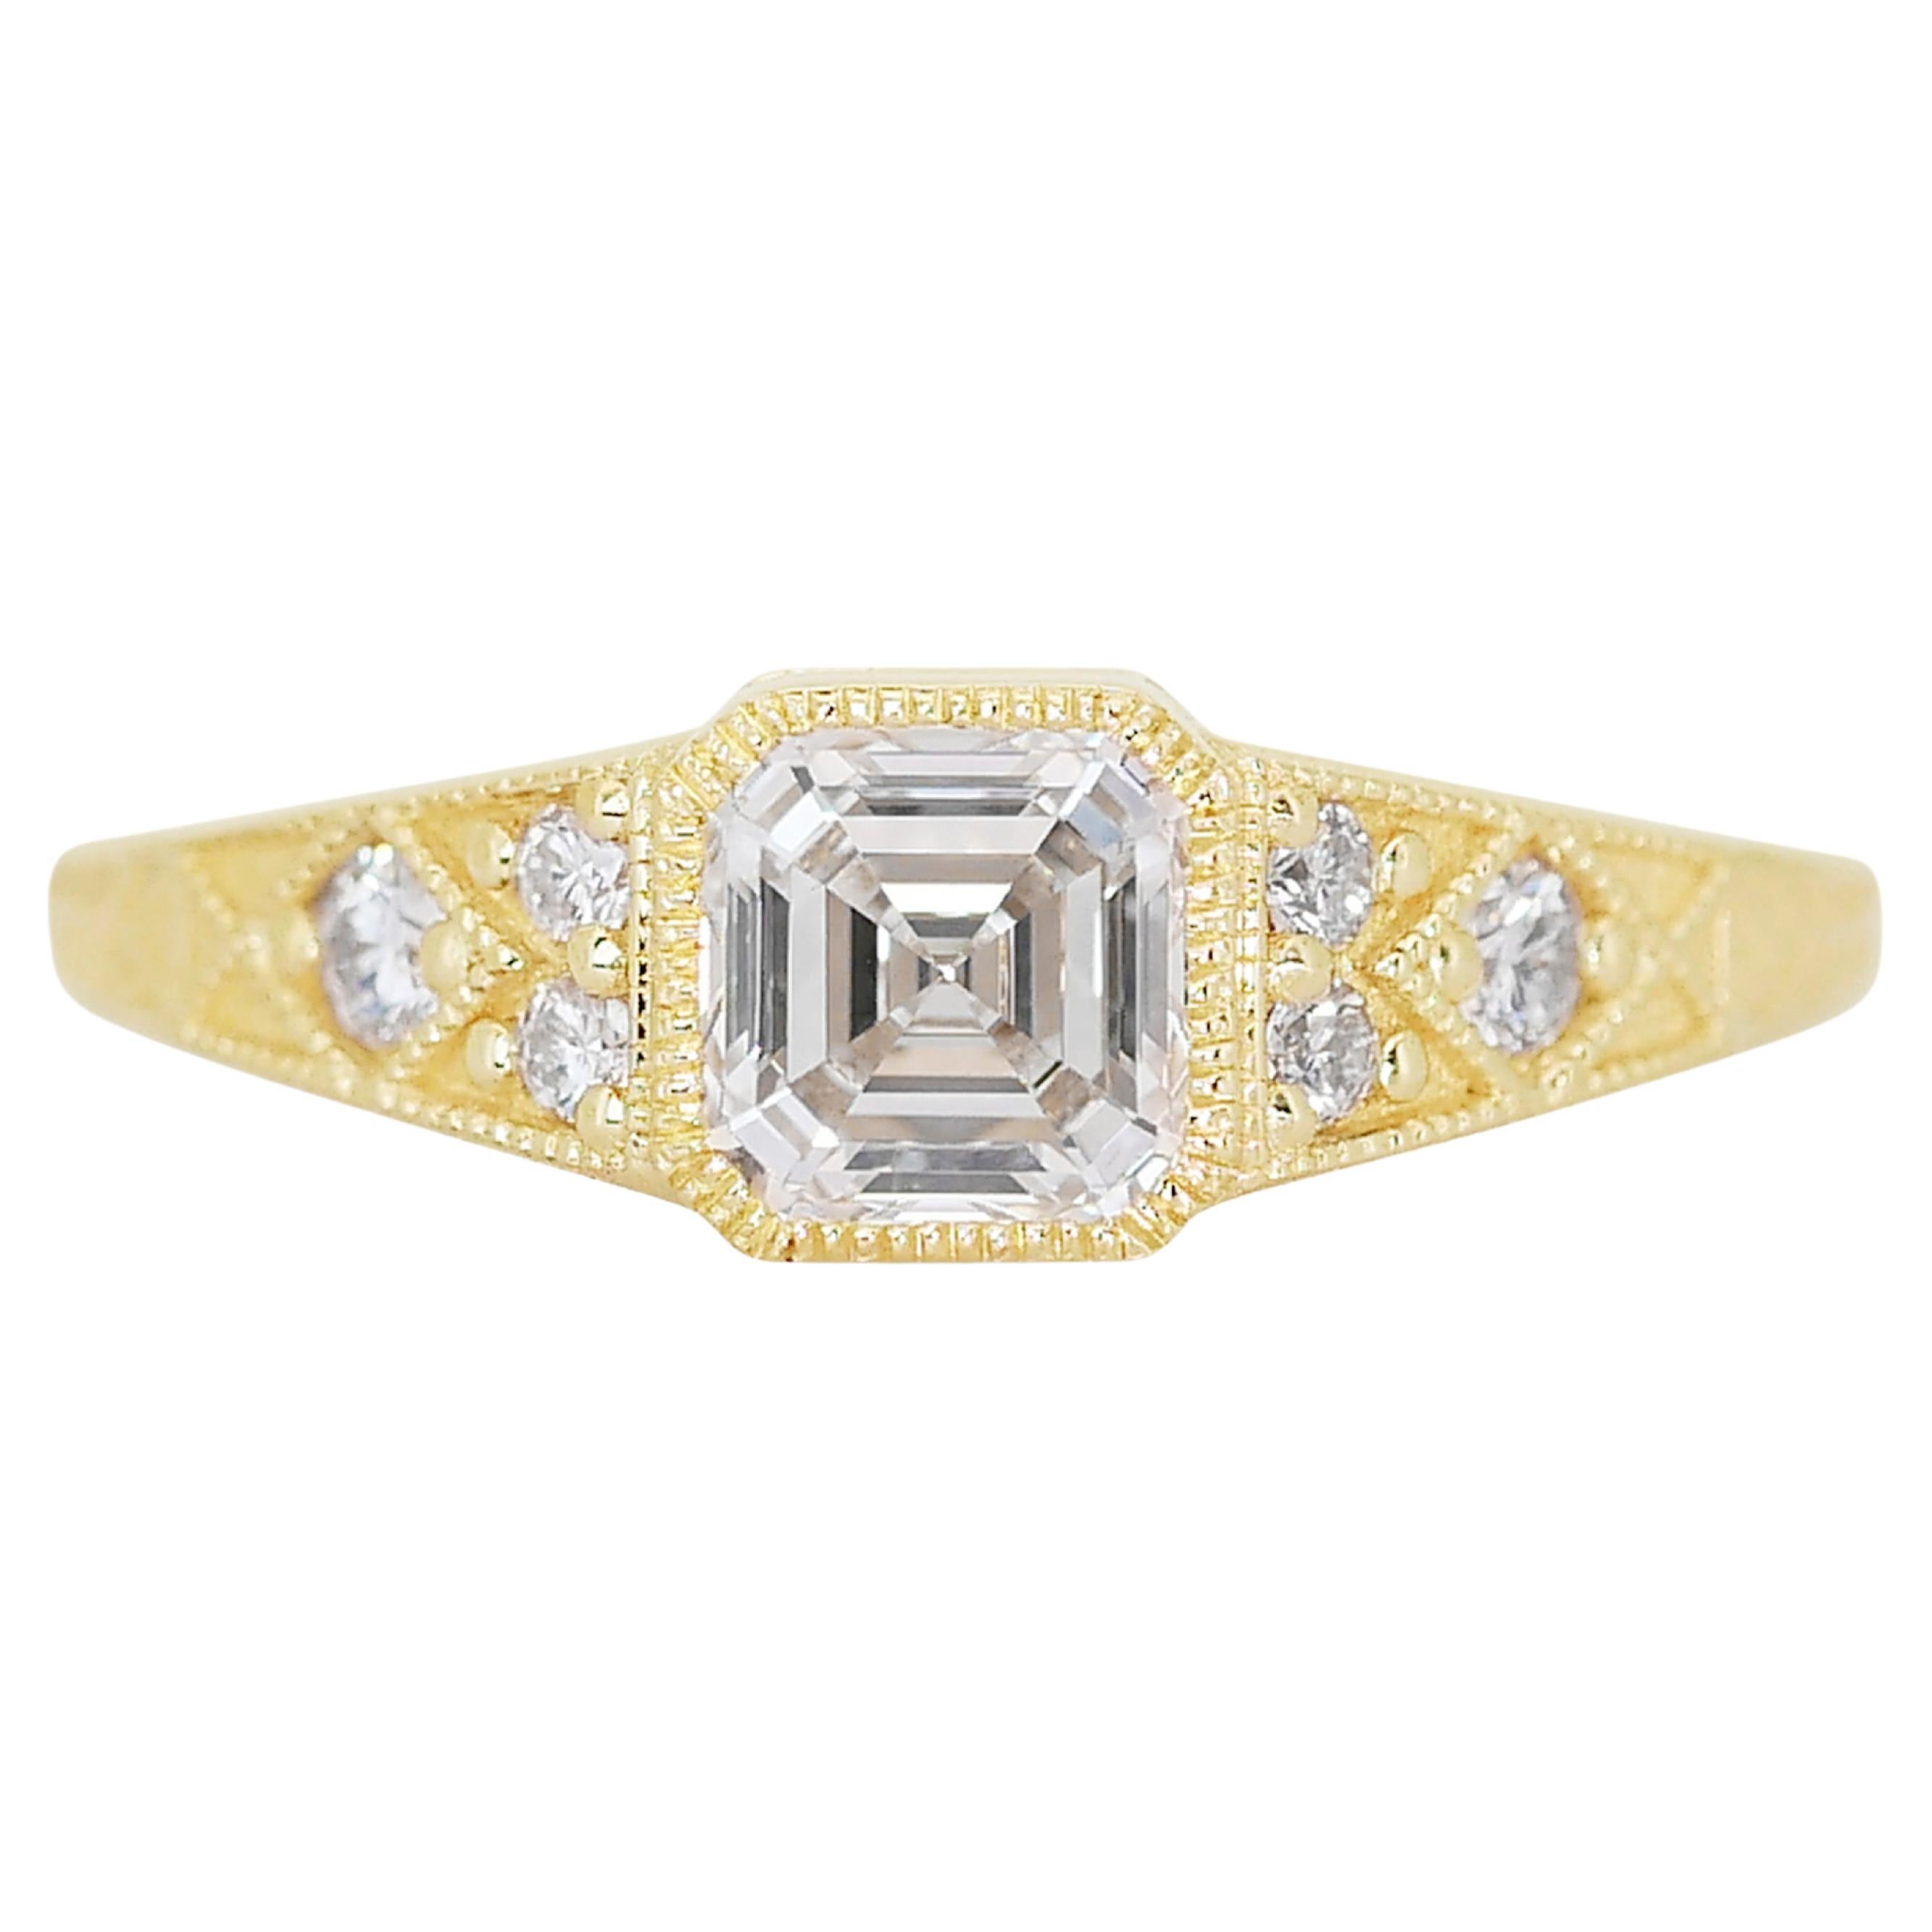 Beautiful 1.17ct Diamonds Pave Ring in 18k Yellow Gold - GIA Certified